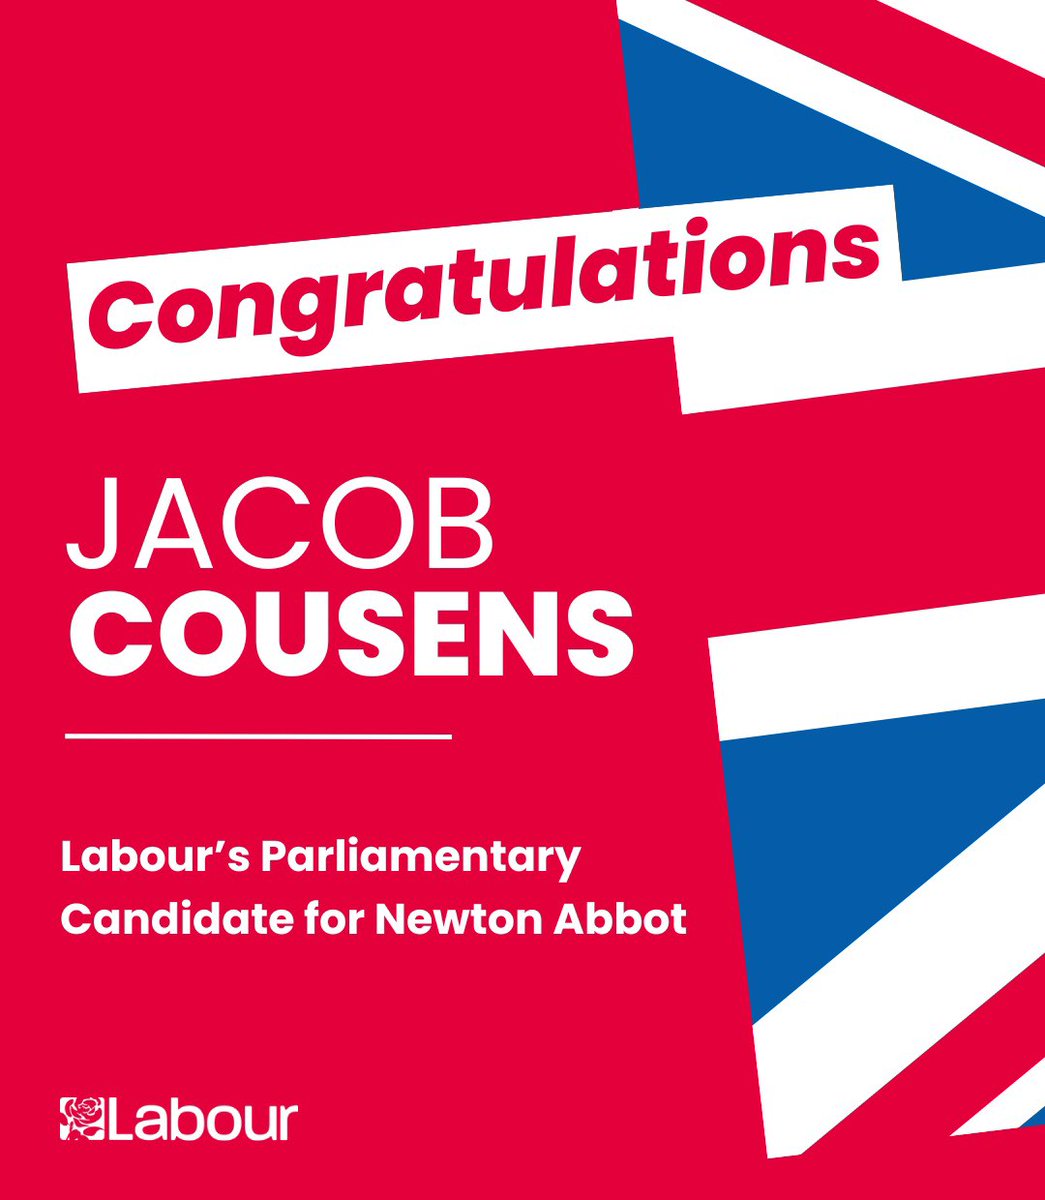 Absolutely thrilled to have been picked as Labour's parliamentary candidate for Newton Abbot at the next general election! The Tories have crashed the economy and after 14 years of chaos working families in Newton Abbot are paying the price. Let's get Britain's future back! 🌹